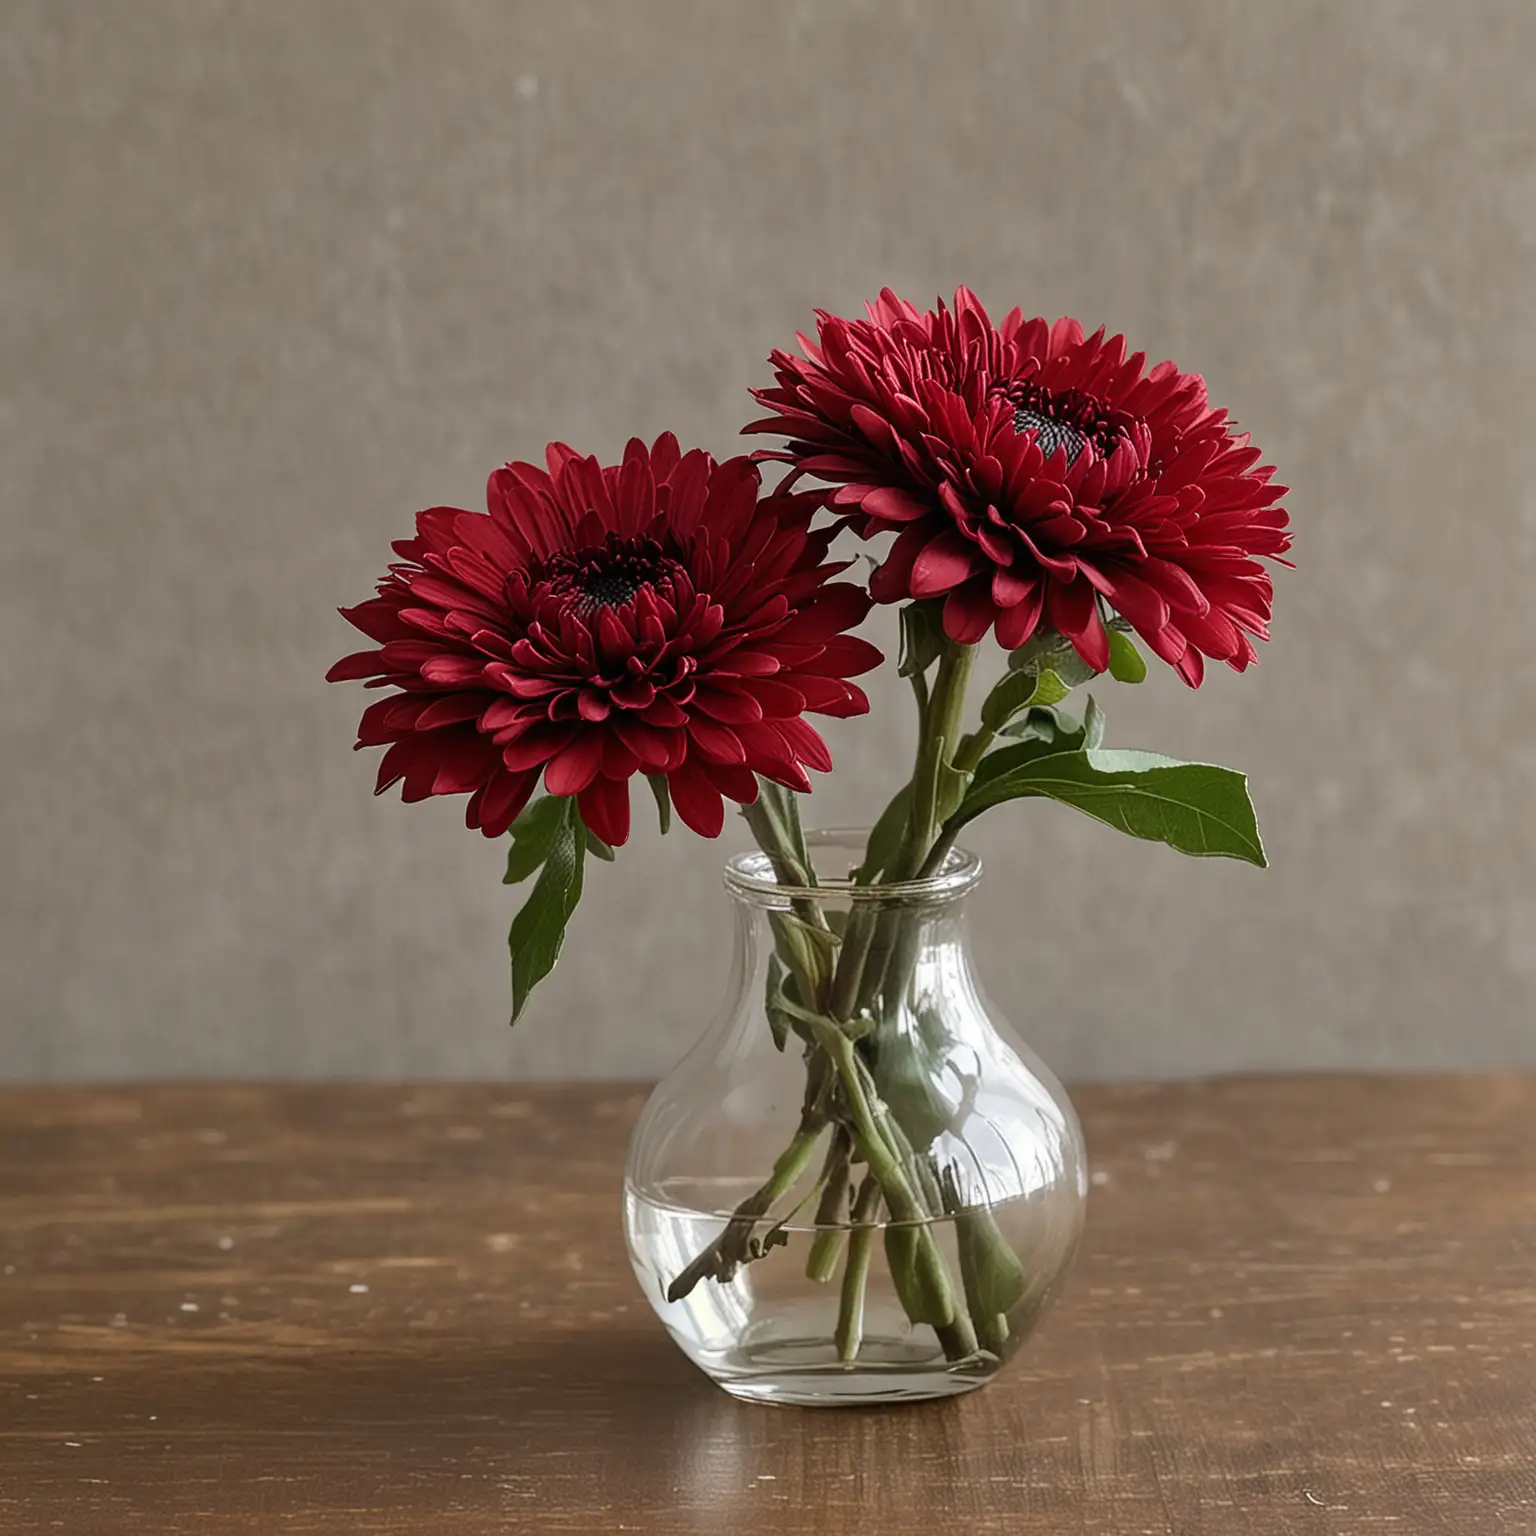 Simple-Fall-Centerpiece-Burgundy-Mums-in-Small-Bud-Vase